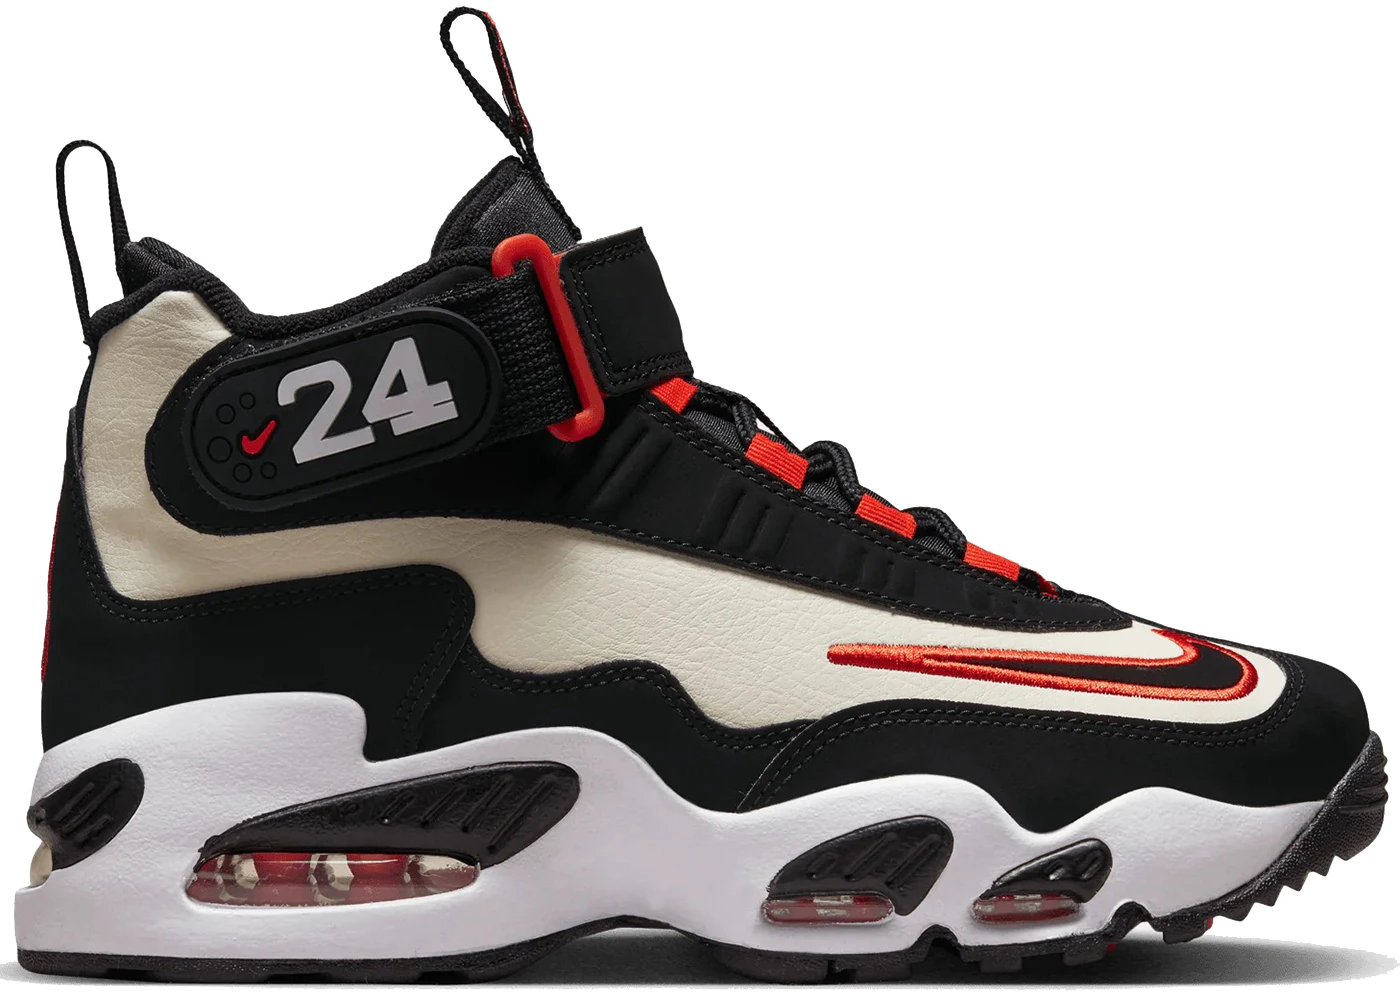 Nike Air Griffey Max 1 GS 'Sweetest Swing